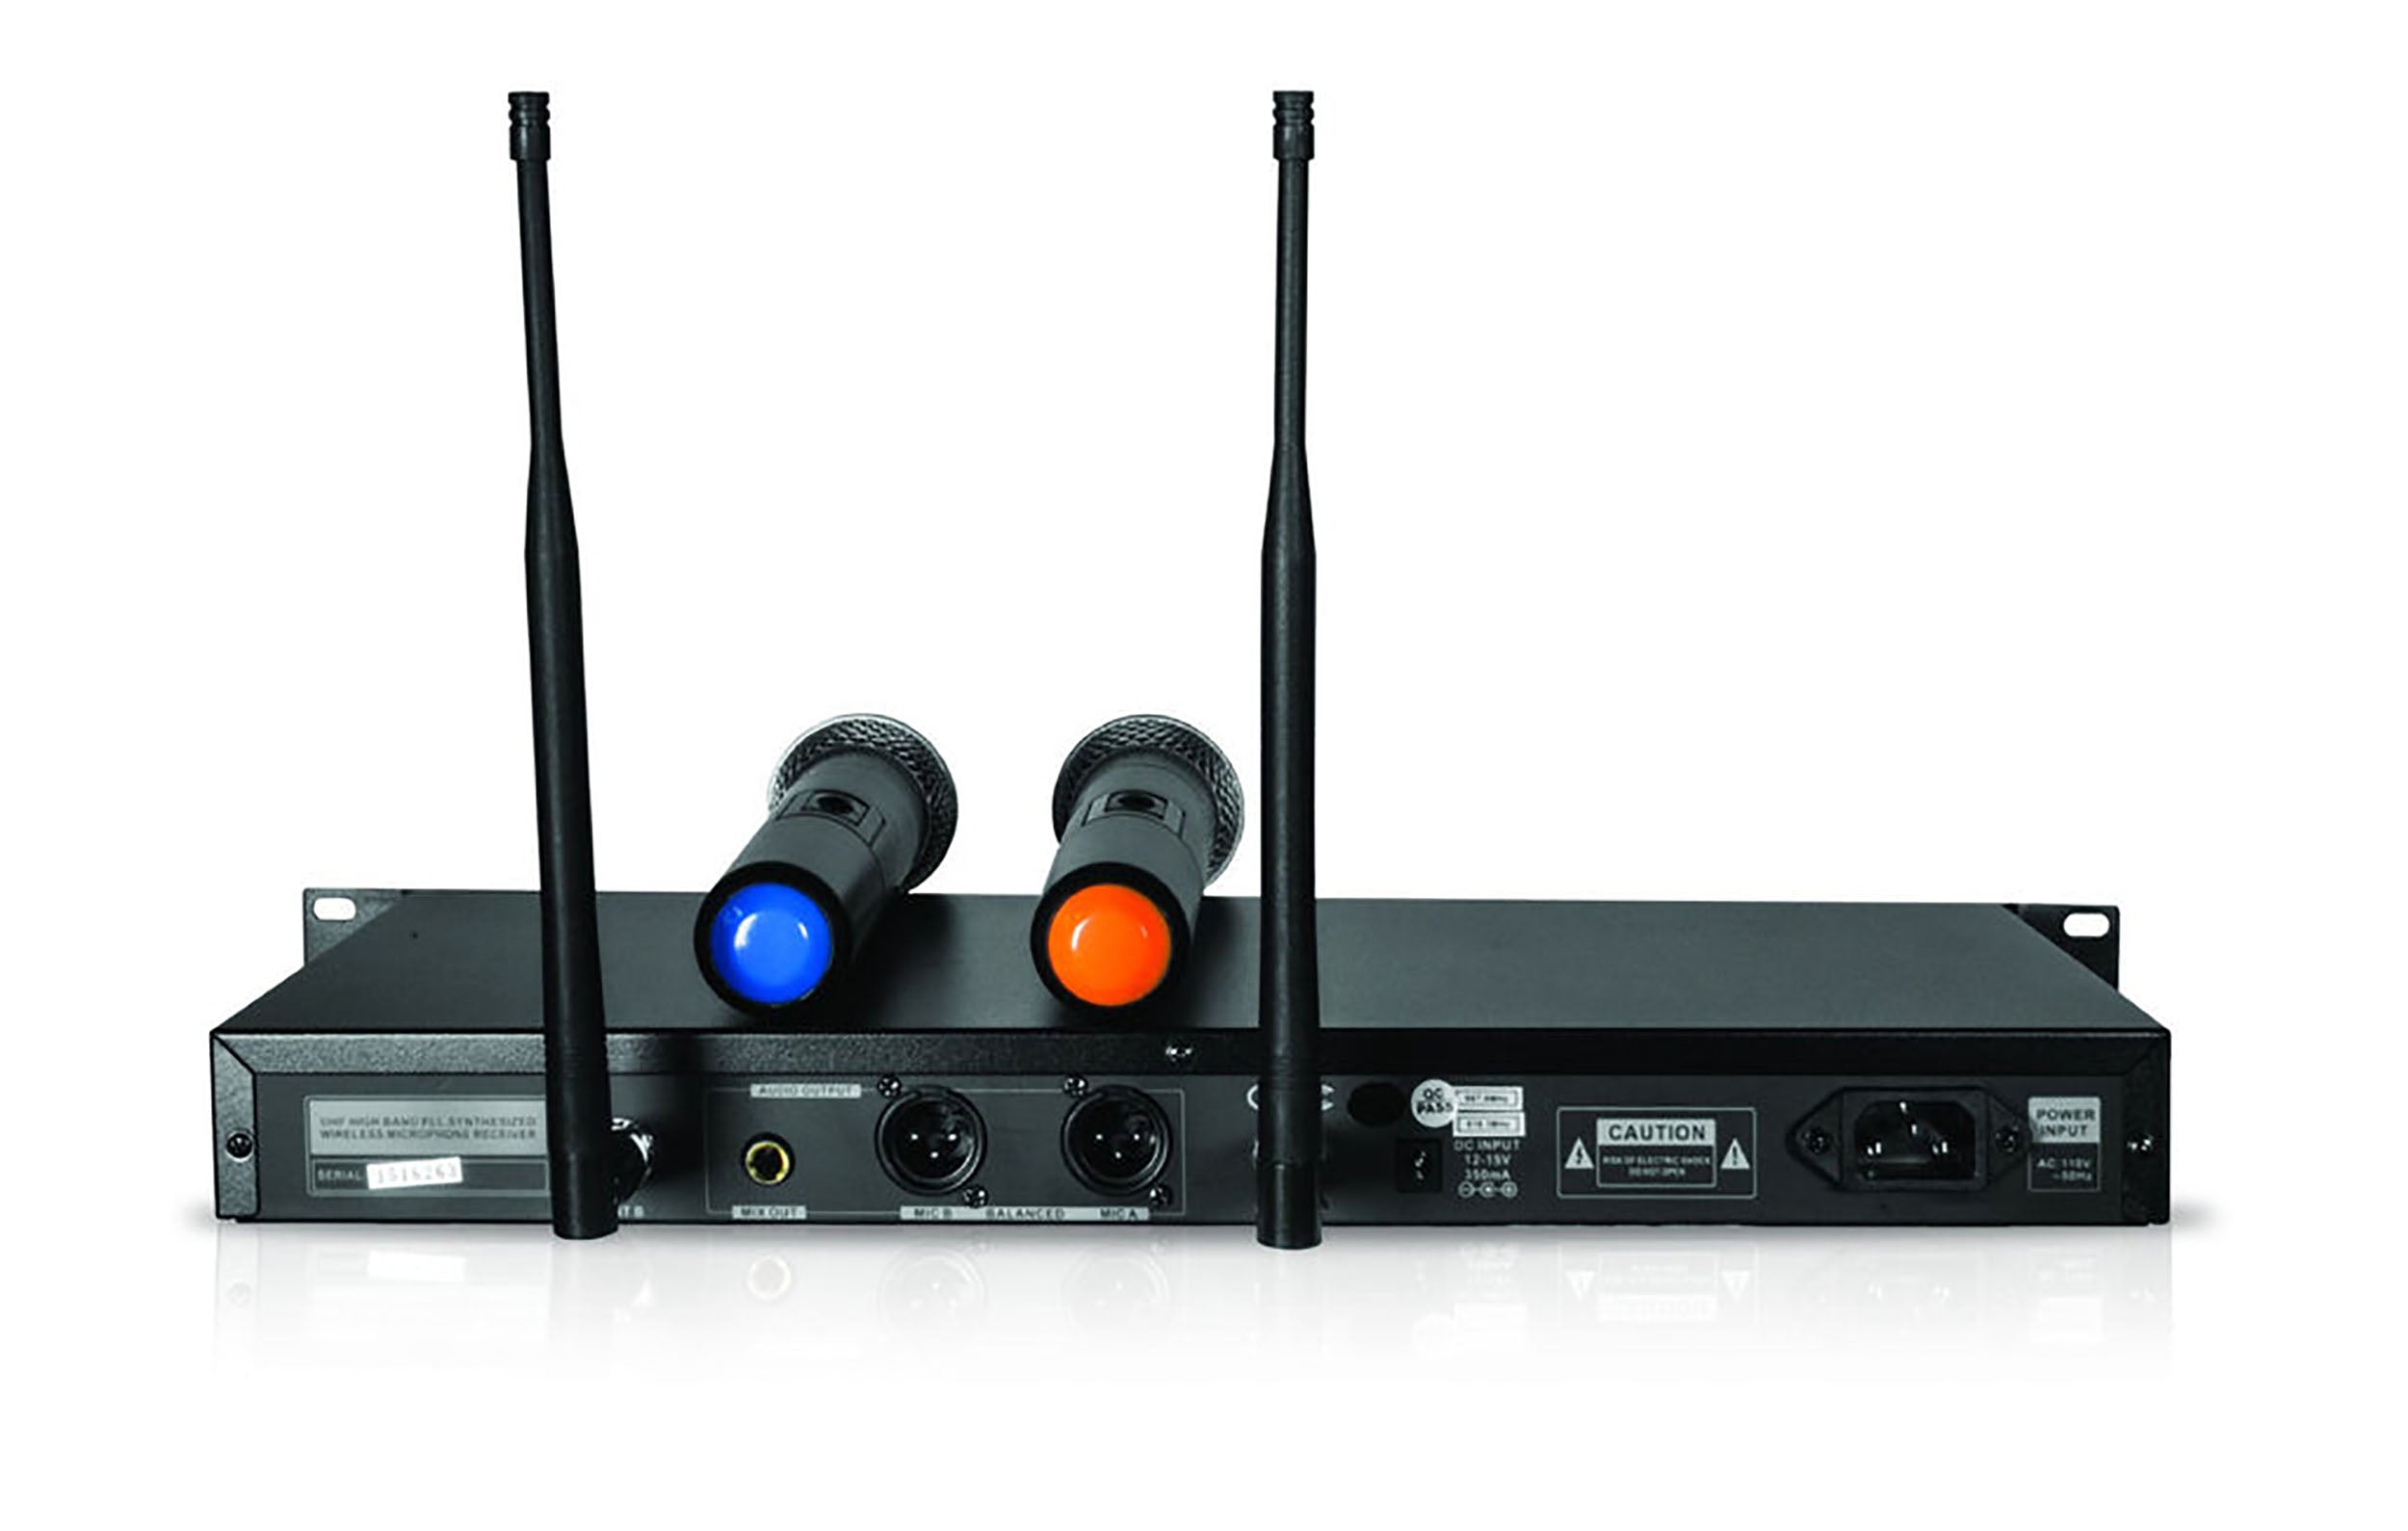 Technical Pro WM1302 Dual UHF Wireless Microphone System by Technical Pro